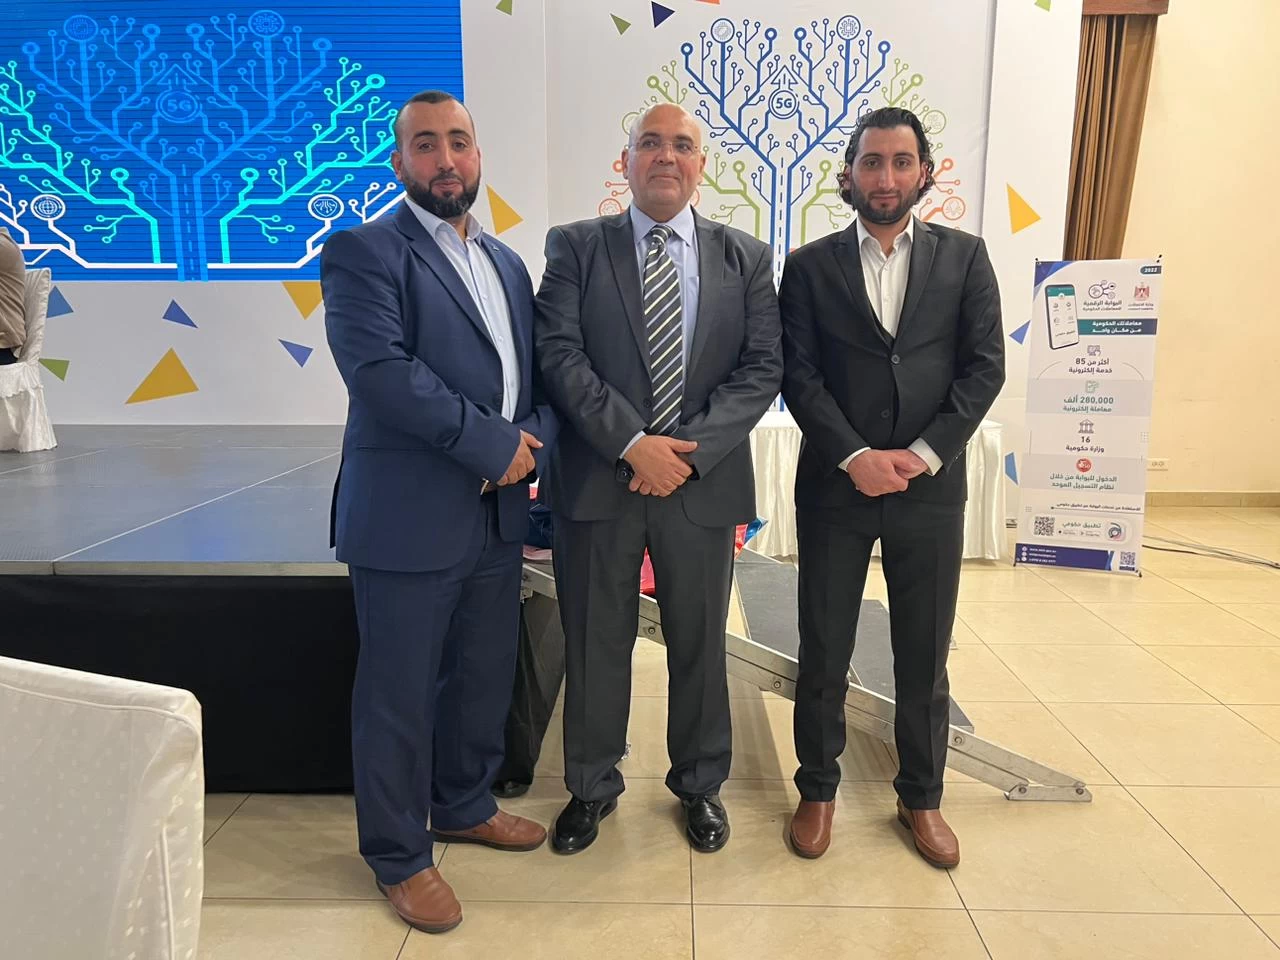 HEXA, a software solutions company, participated in the events of the Palestine Technology Week - Exponential 2022.